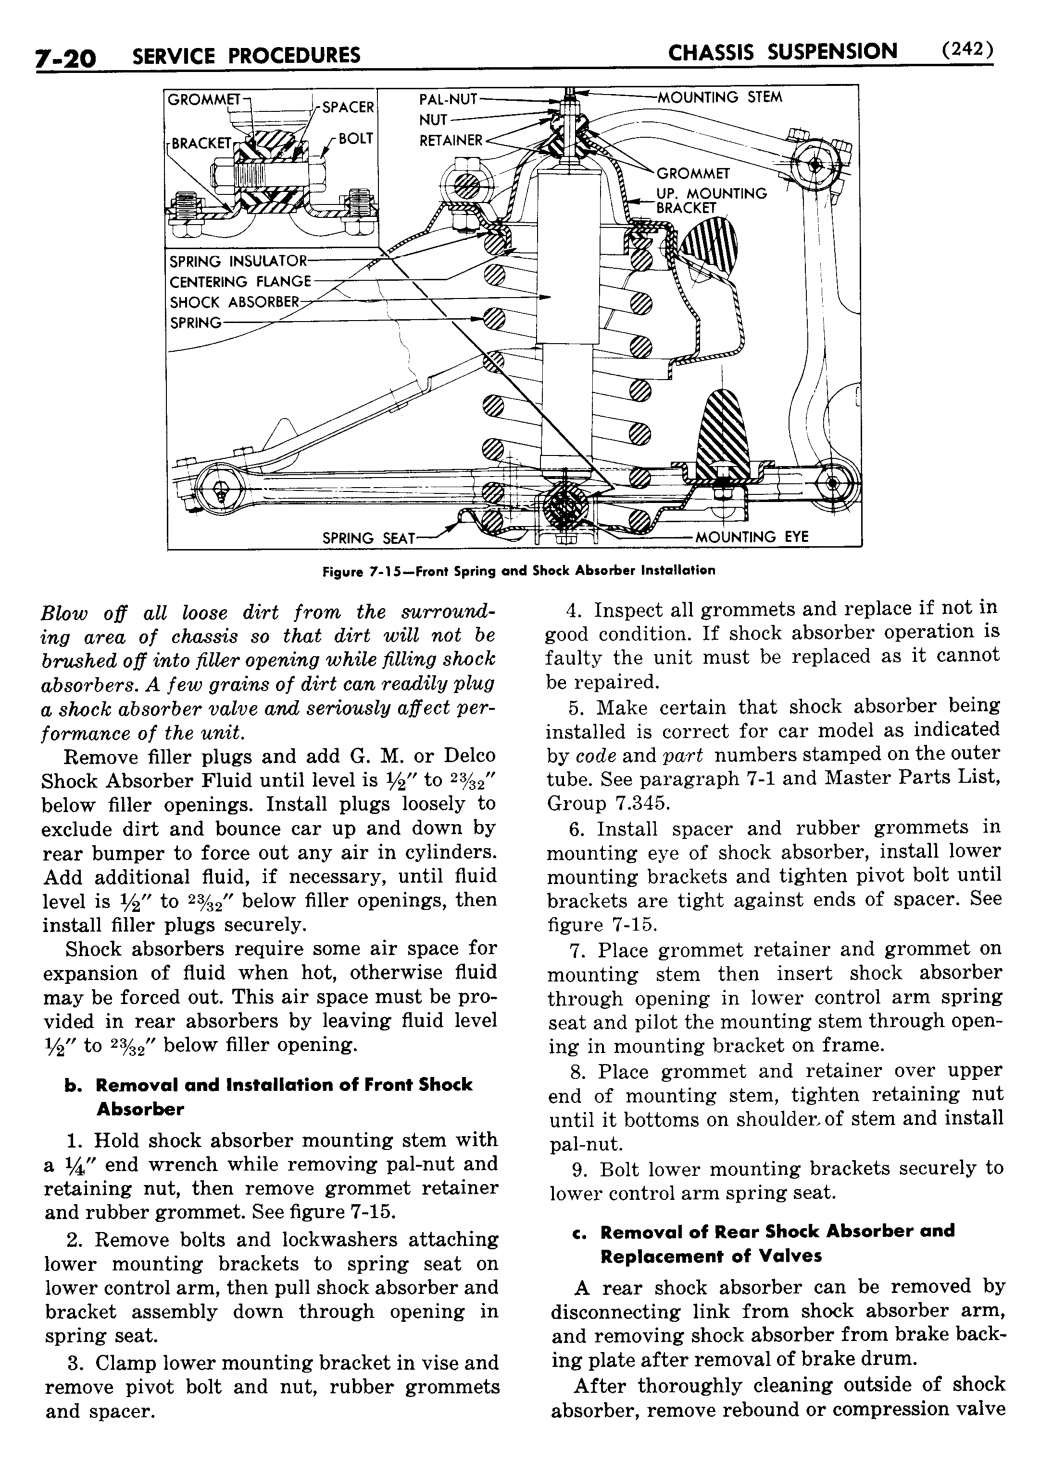 n_08 1955 Buick Shop Manual - Chassis Suspension-020-020.jpg